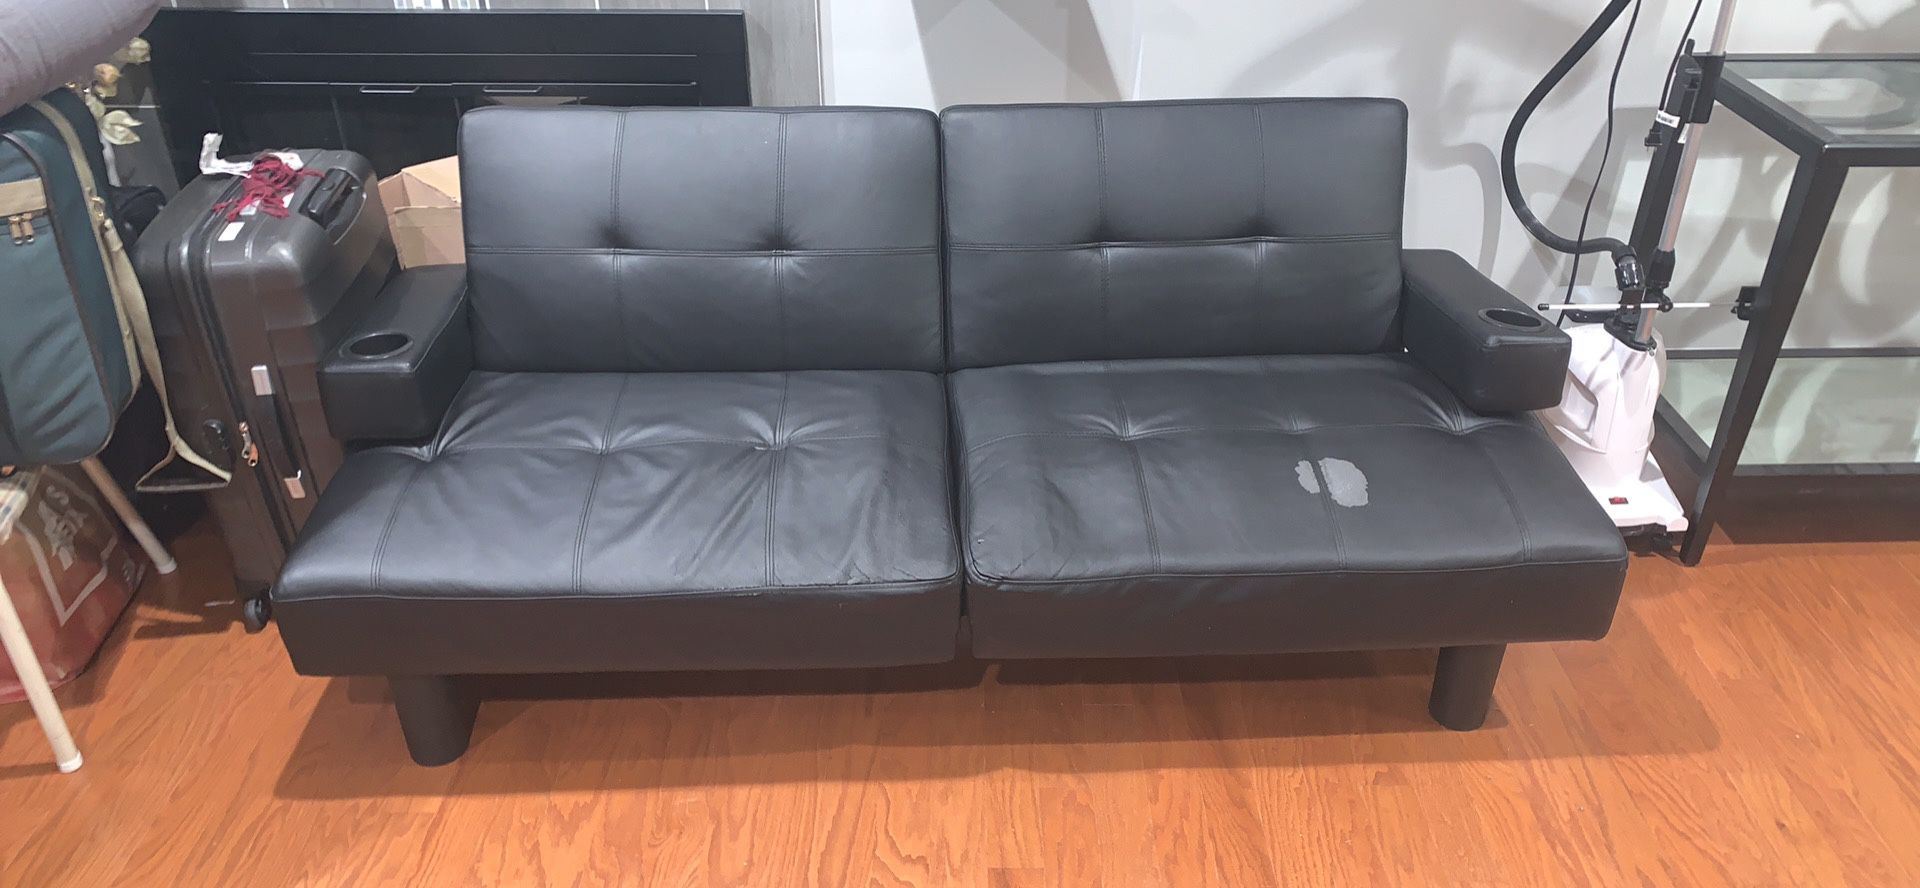 Black leather Futon with cup holder stand